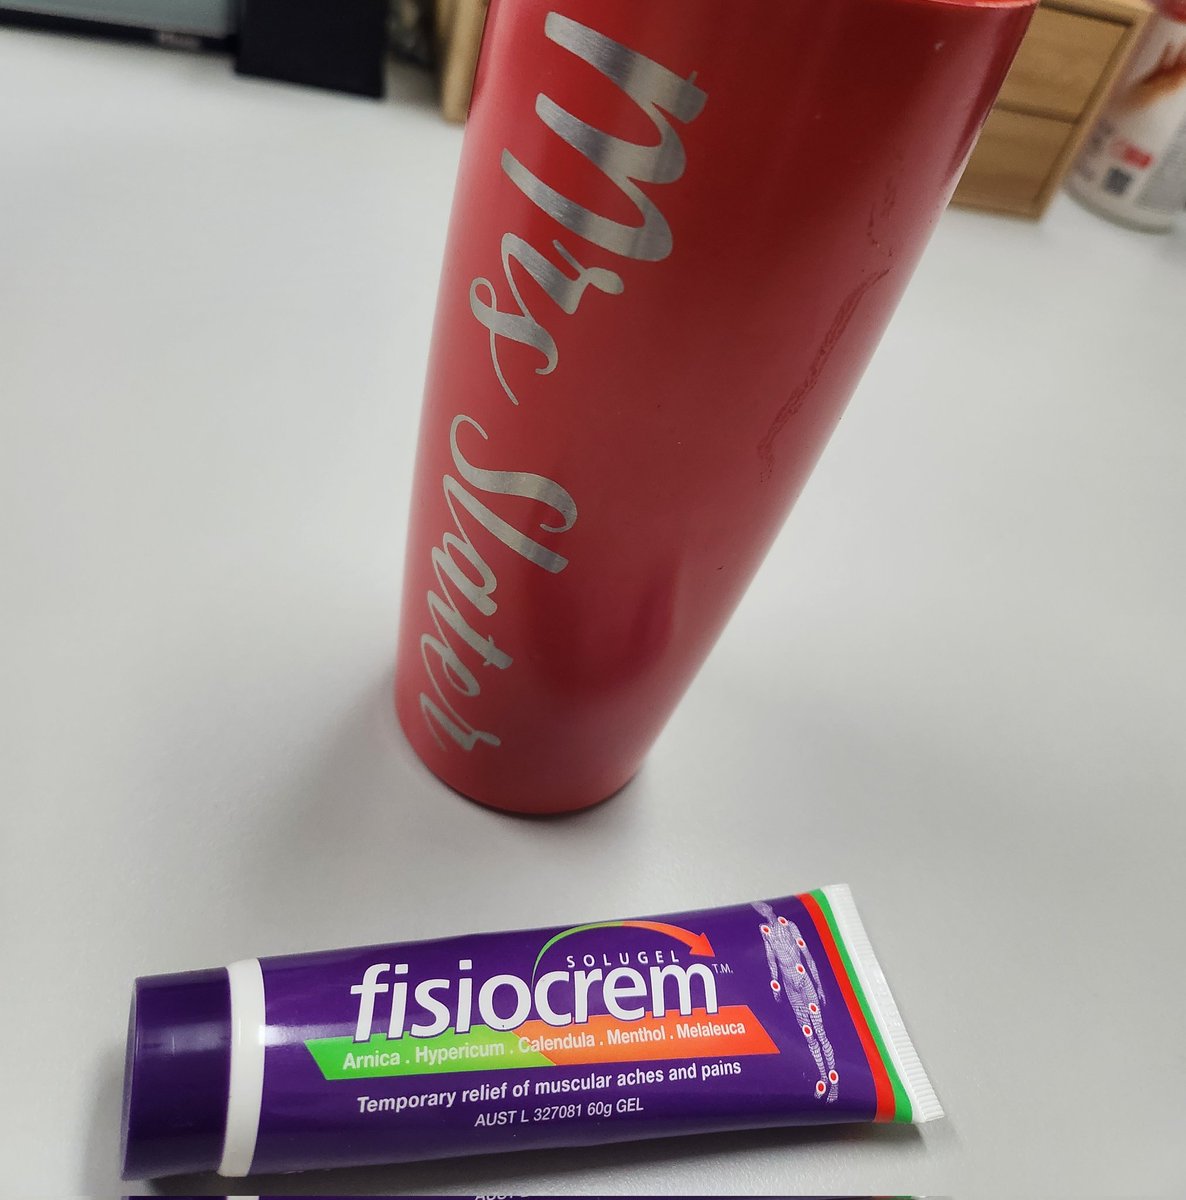 #hurtingsucks
But with coffee and #fisiocrem it all seems that bit better 💜
Thanks @fisiocremaust 
#purplearmy